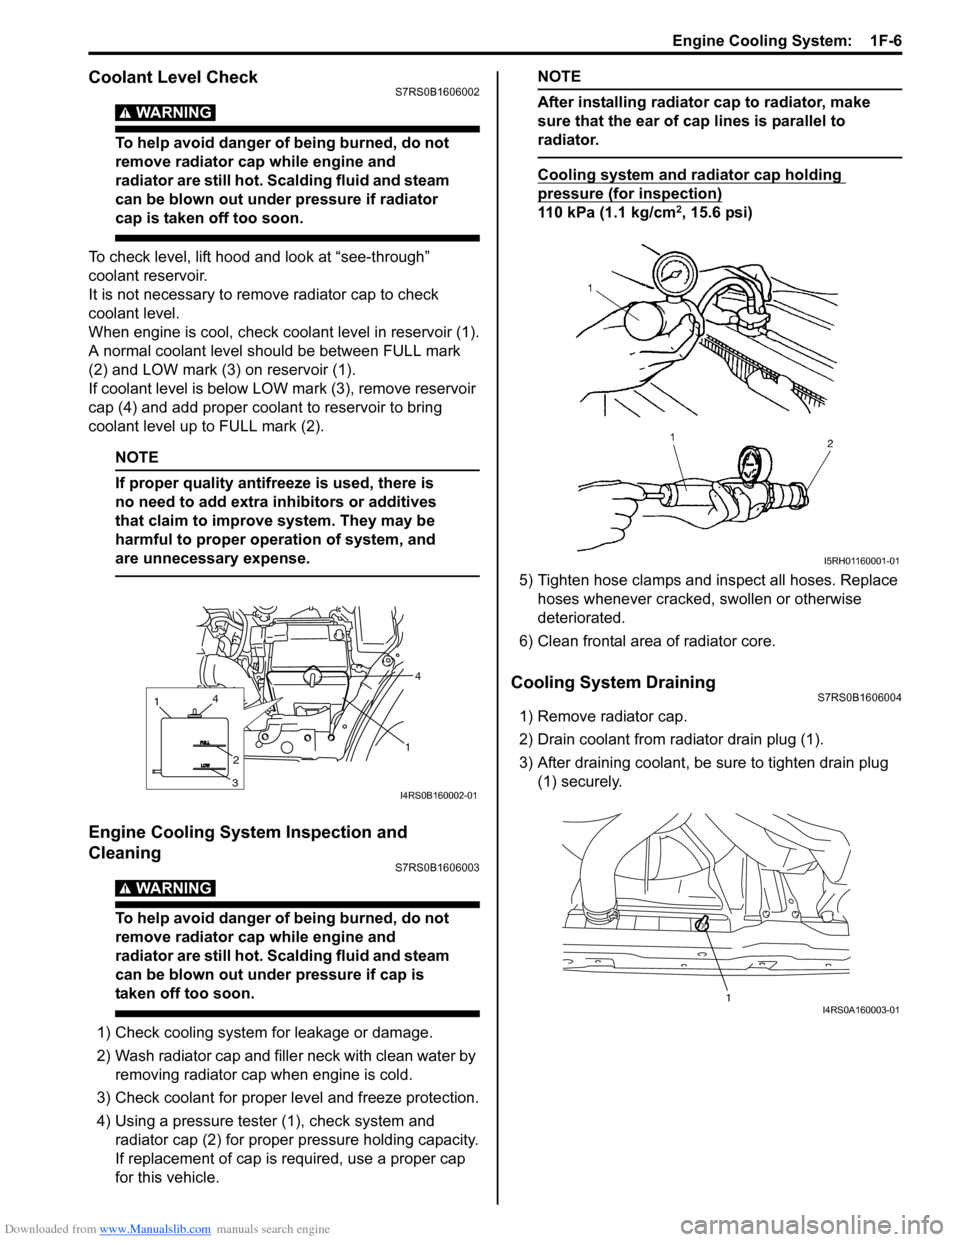 SUZUKI SWIFT 2006 2.G Service Workshop Manual Downloaded from www.Manualslib.com manuals search engine Engine Cooling System:  1F-6
Coolant Level CheckS7RS0B1606002
WARNING! 
To help avoid danger of being burned, do not 
remove radiator cap while